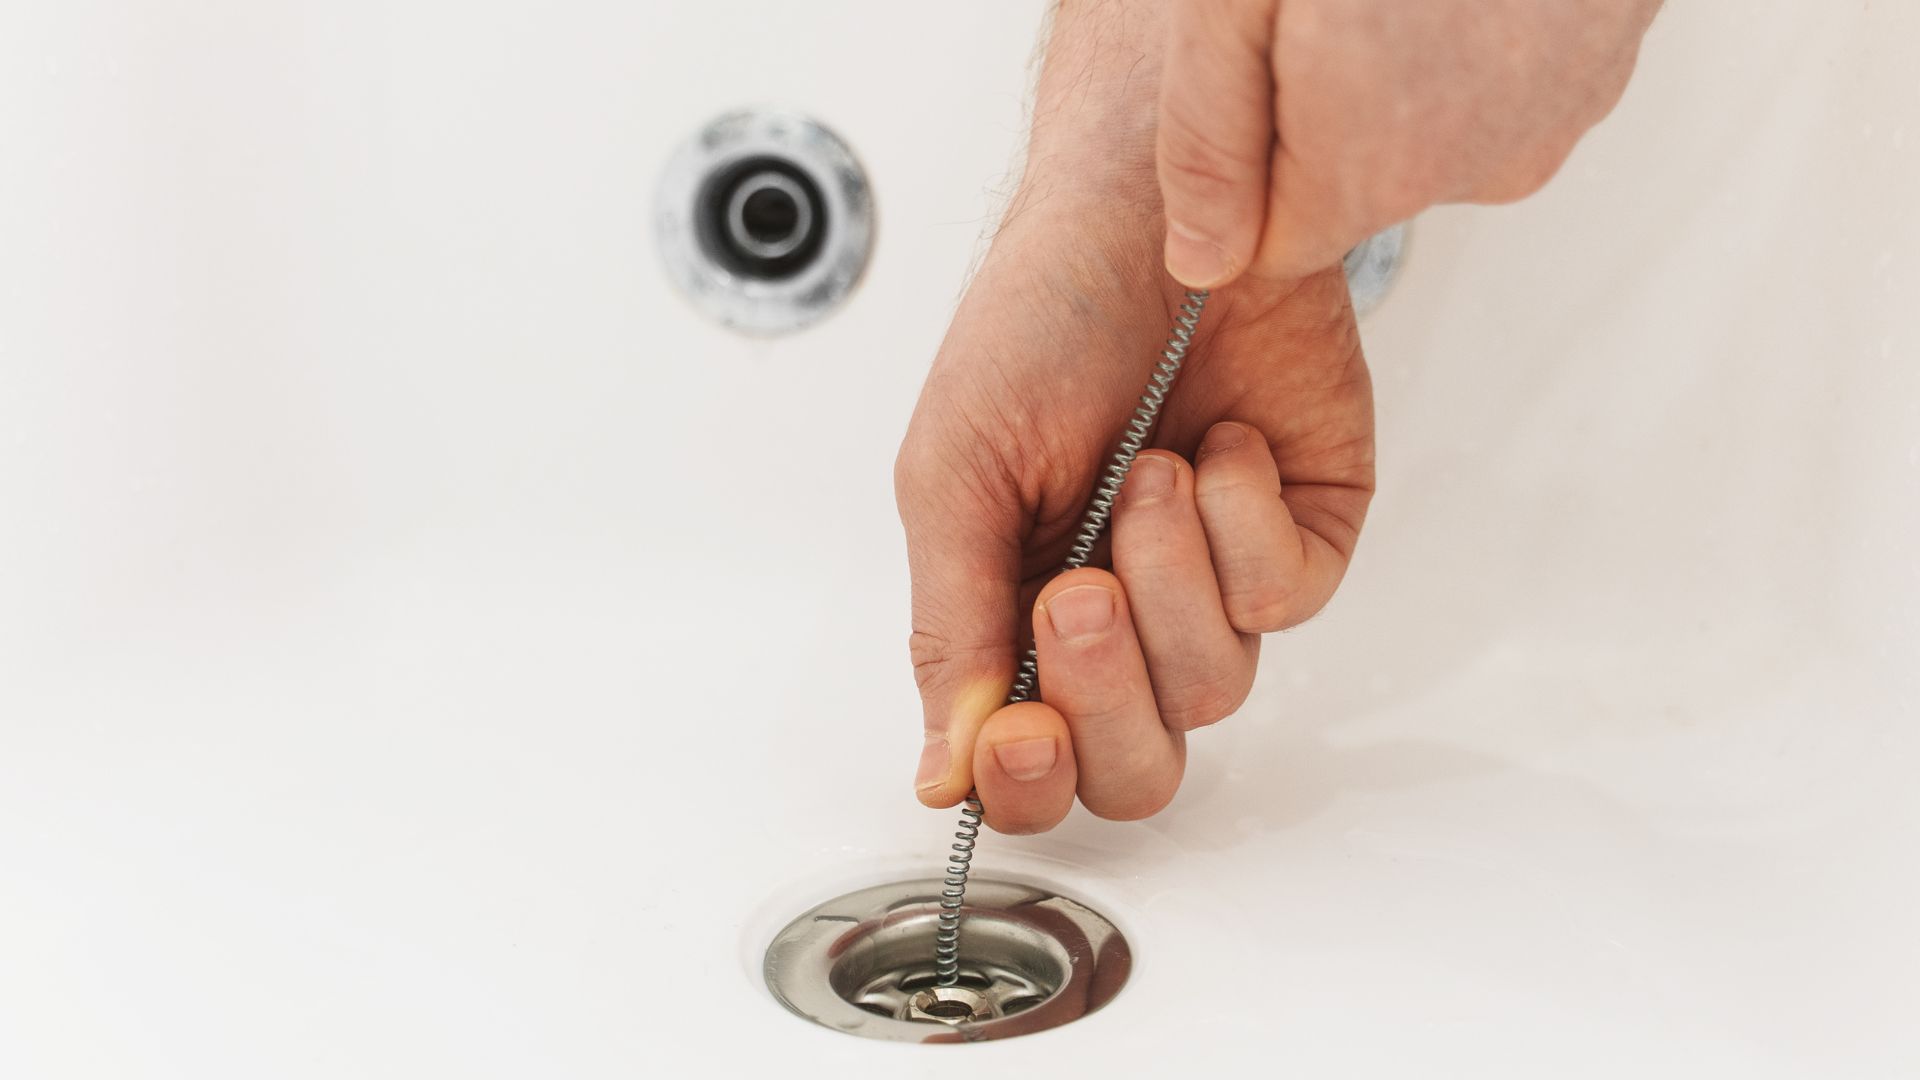 Plumber Drain Cleaning Service by plumbers